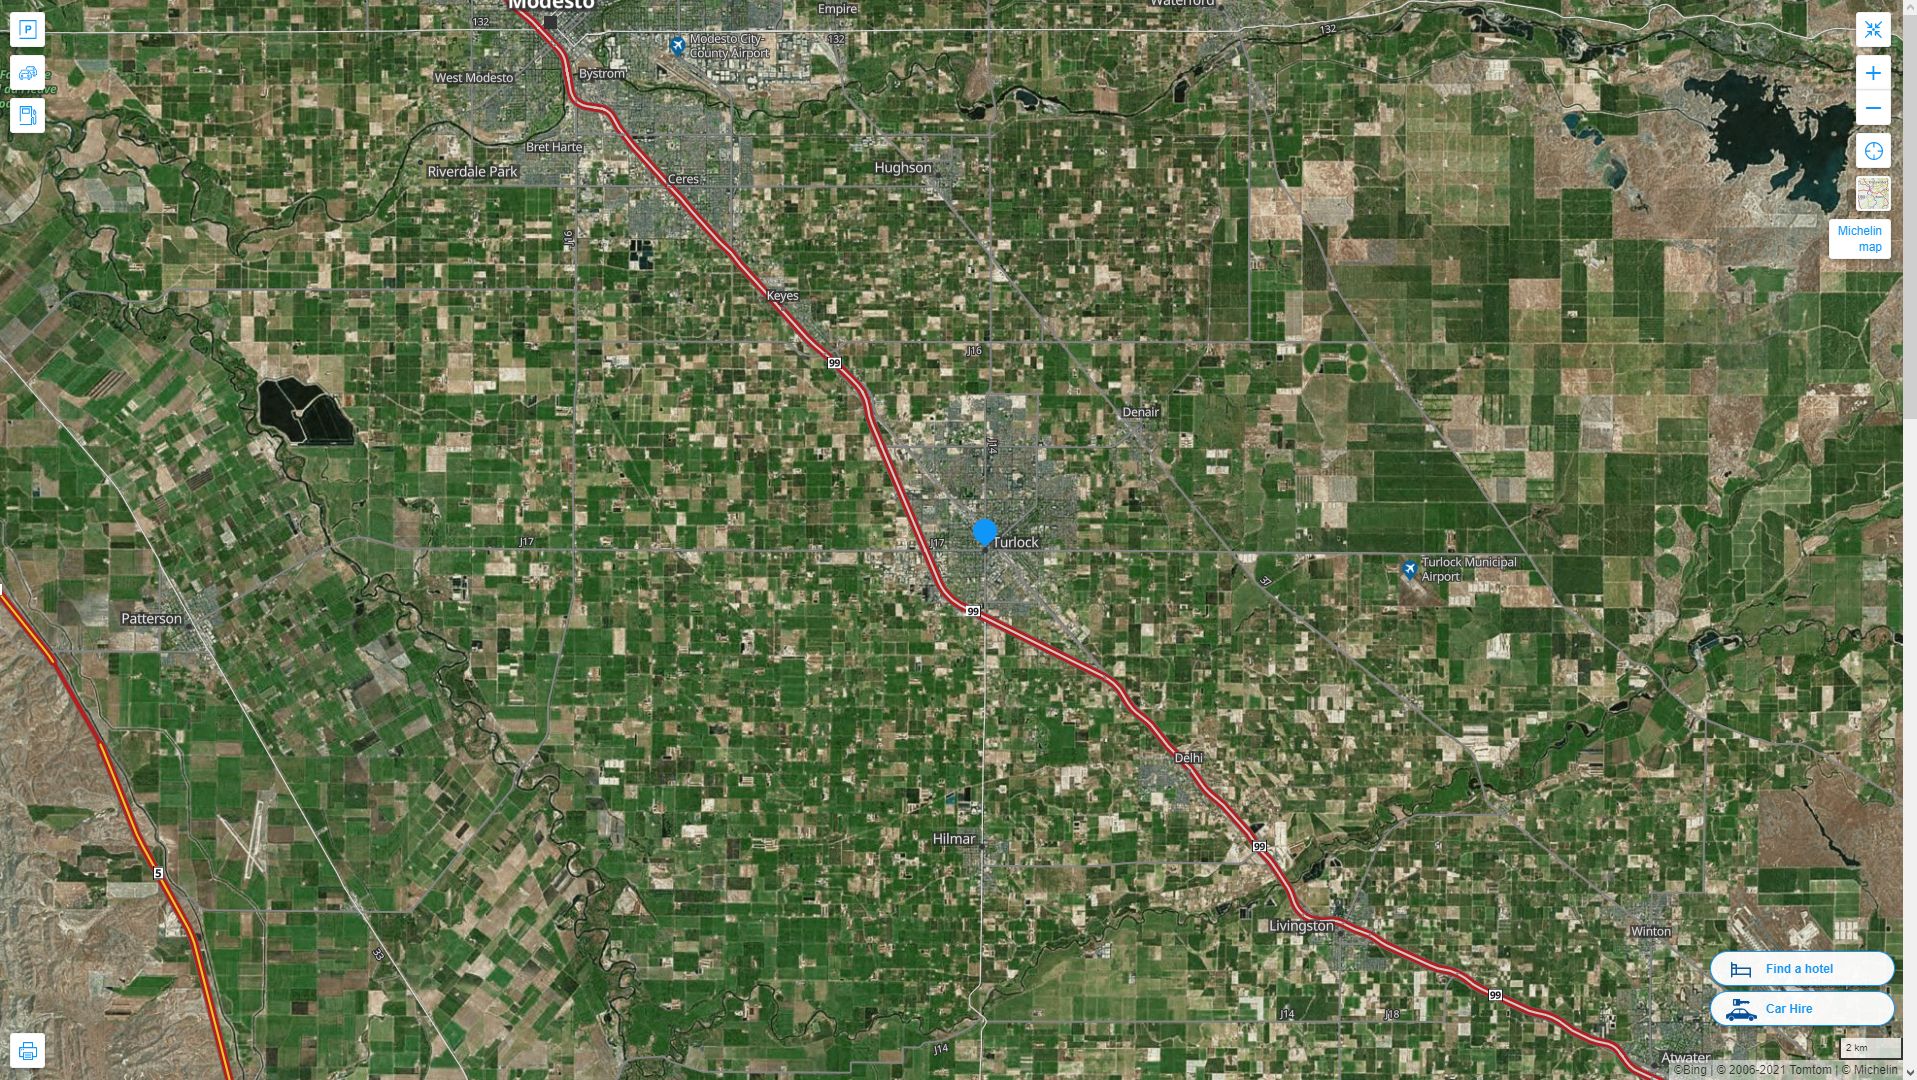 Turlock California Highway and Road Map with Satellite View